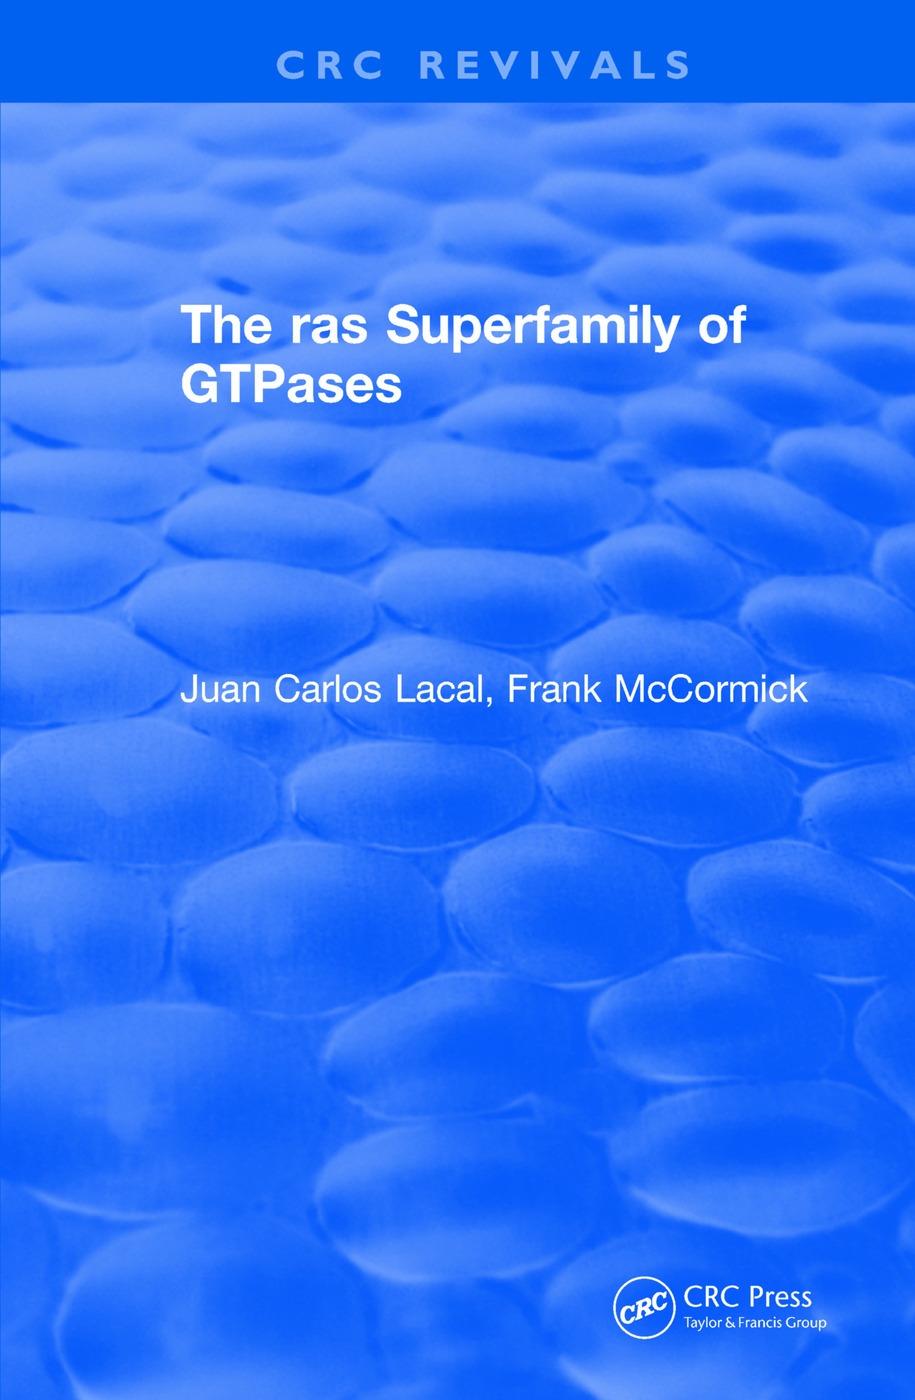 The the Ras Superfamily of Gtpases (1993)